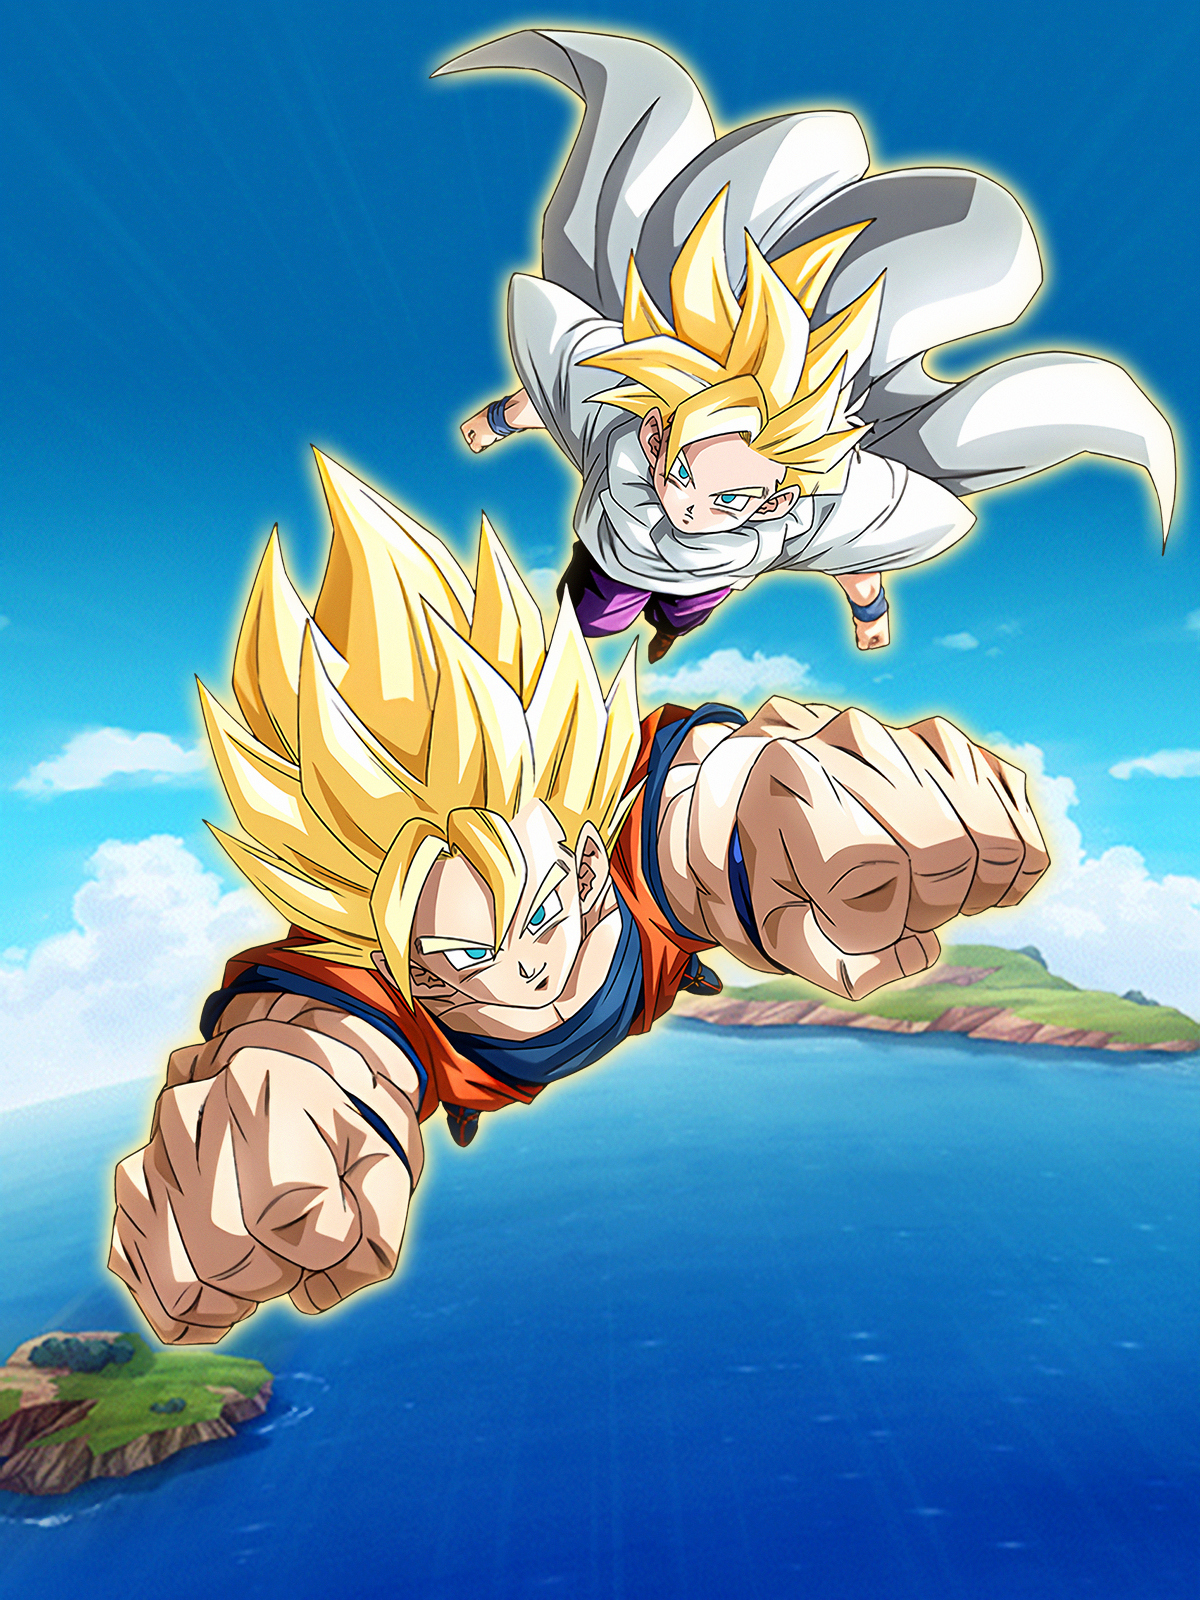 Get Super Saiyan Gohan (Youth) from this ongoing Event!